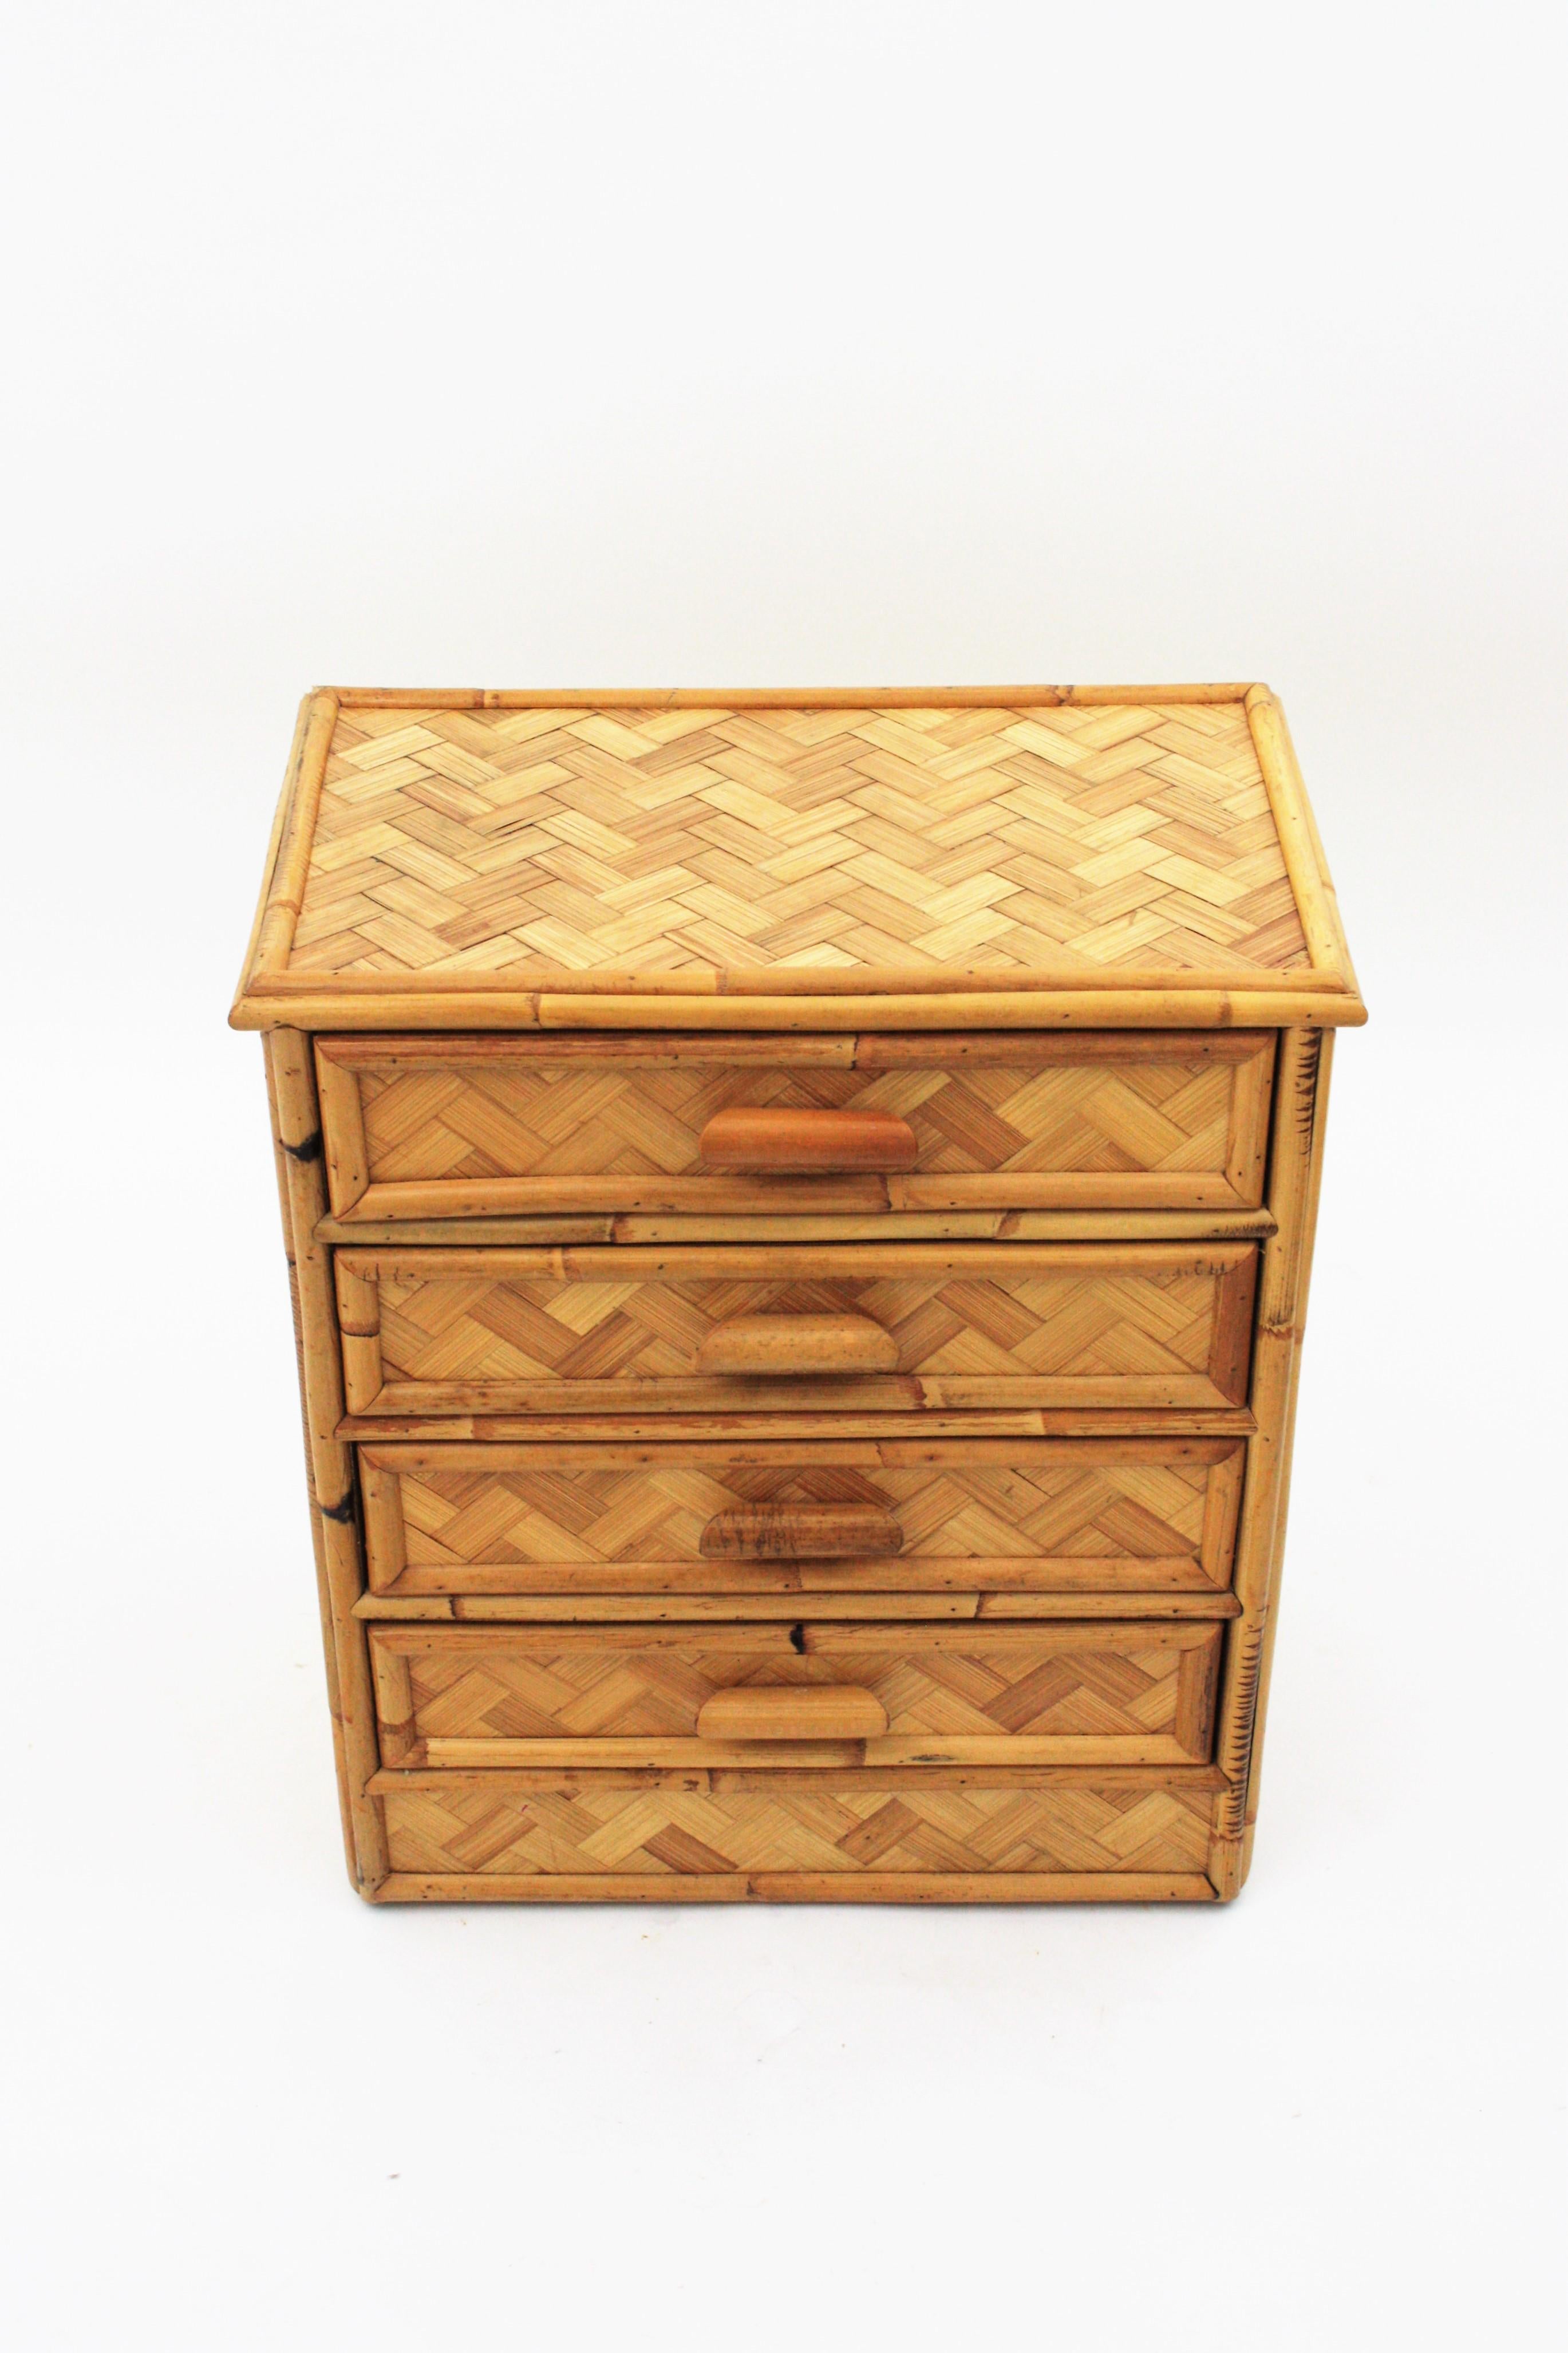 Pair of Rattan Bamboo Nightstands / Small Chests, 1970s For Sale 2